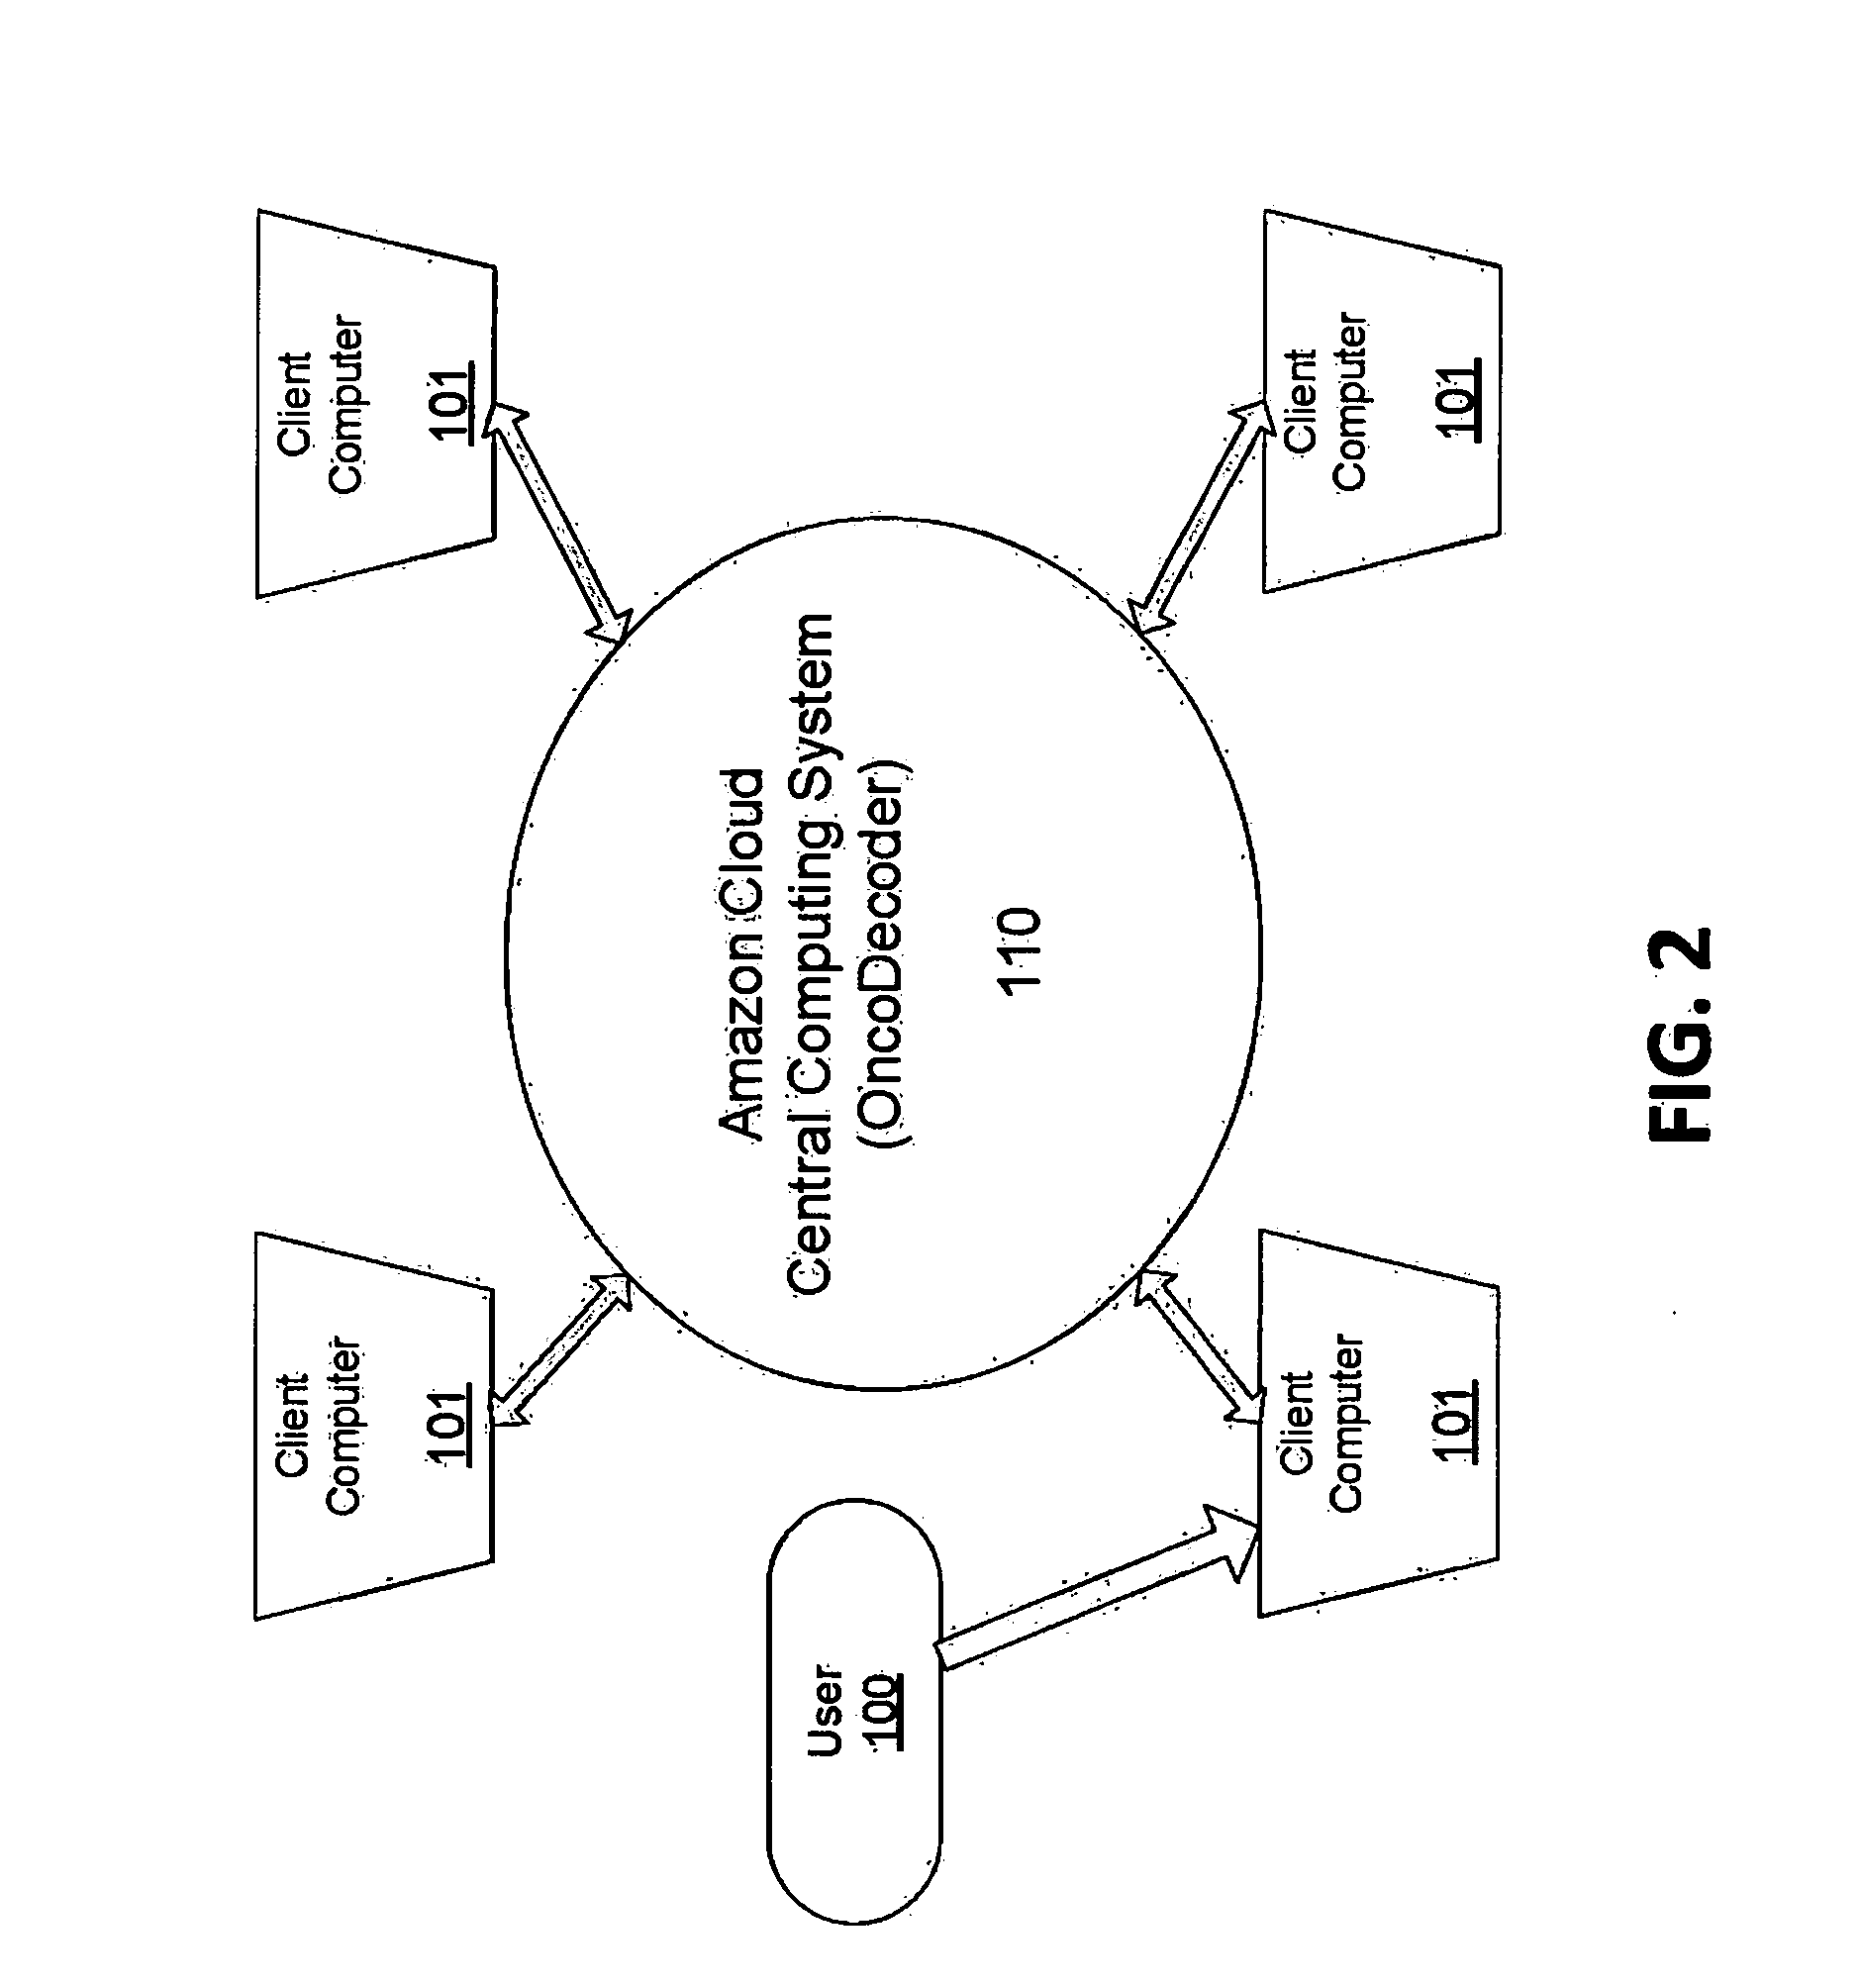 Systems and methods for cancer-specific drug targets and biomarkers discovery